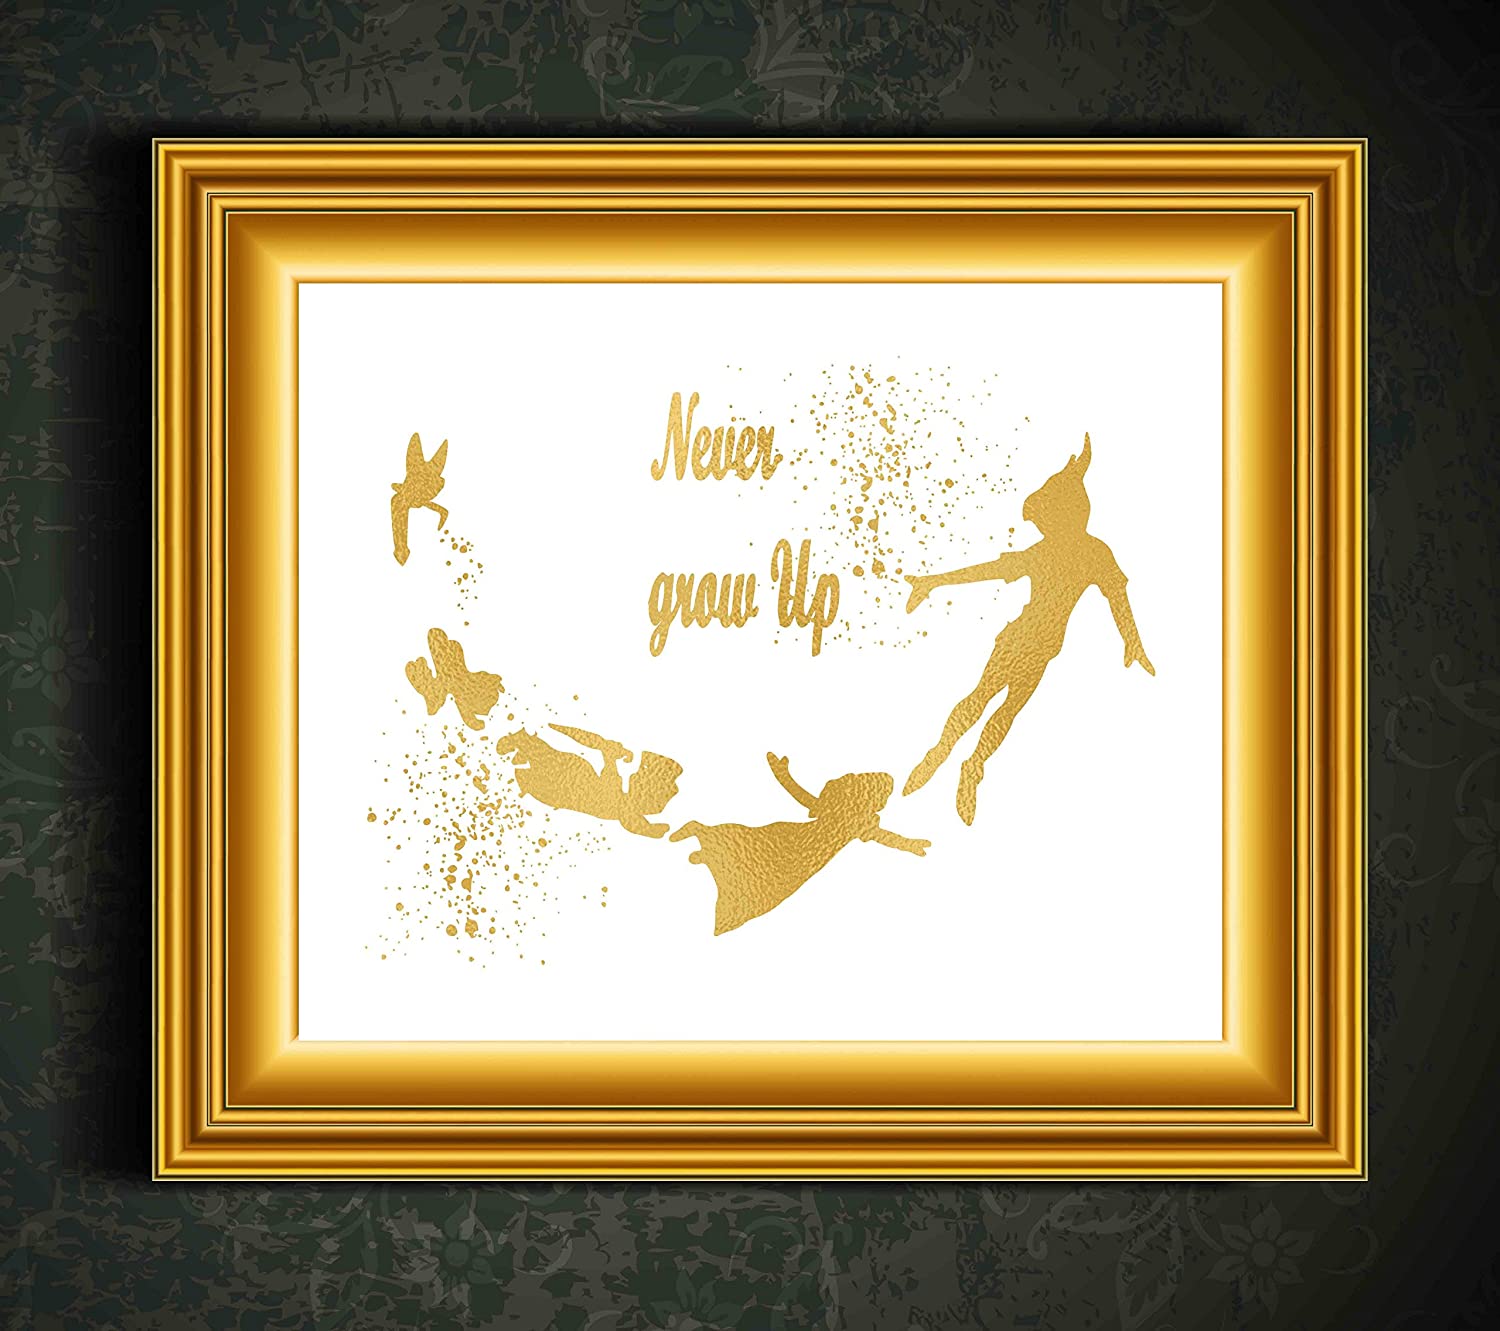 peter pan quote poster